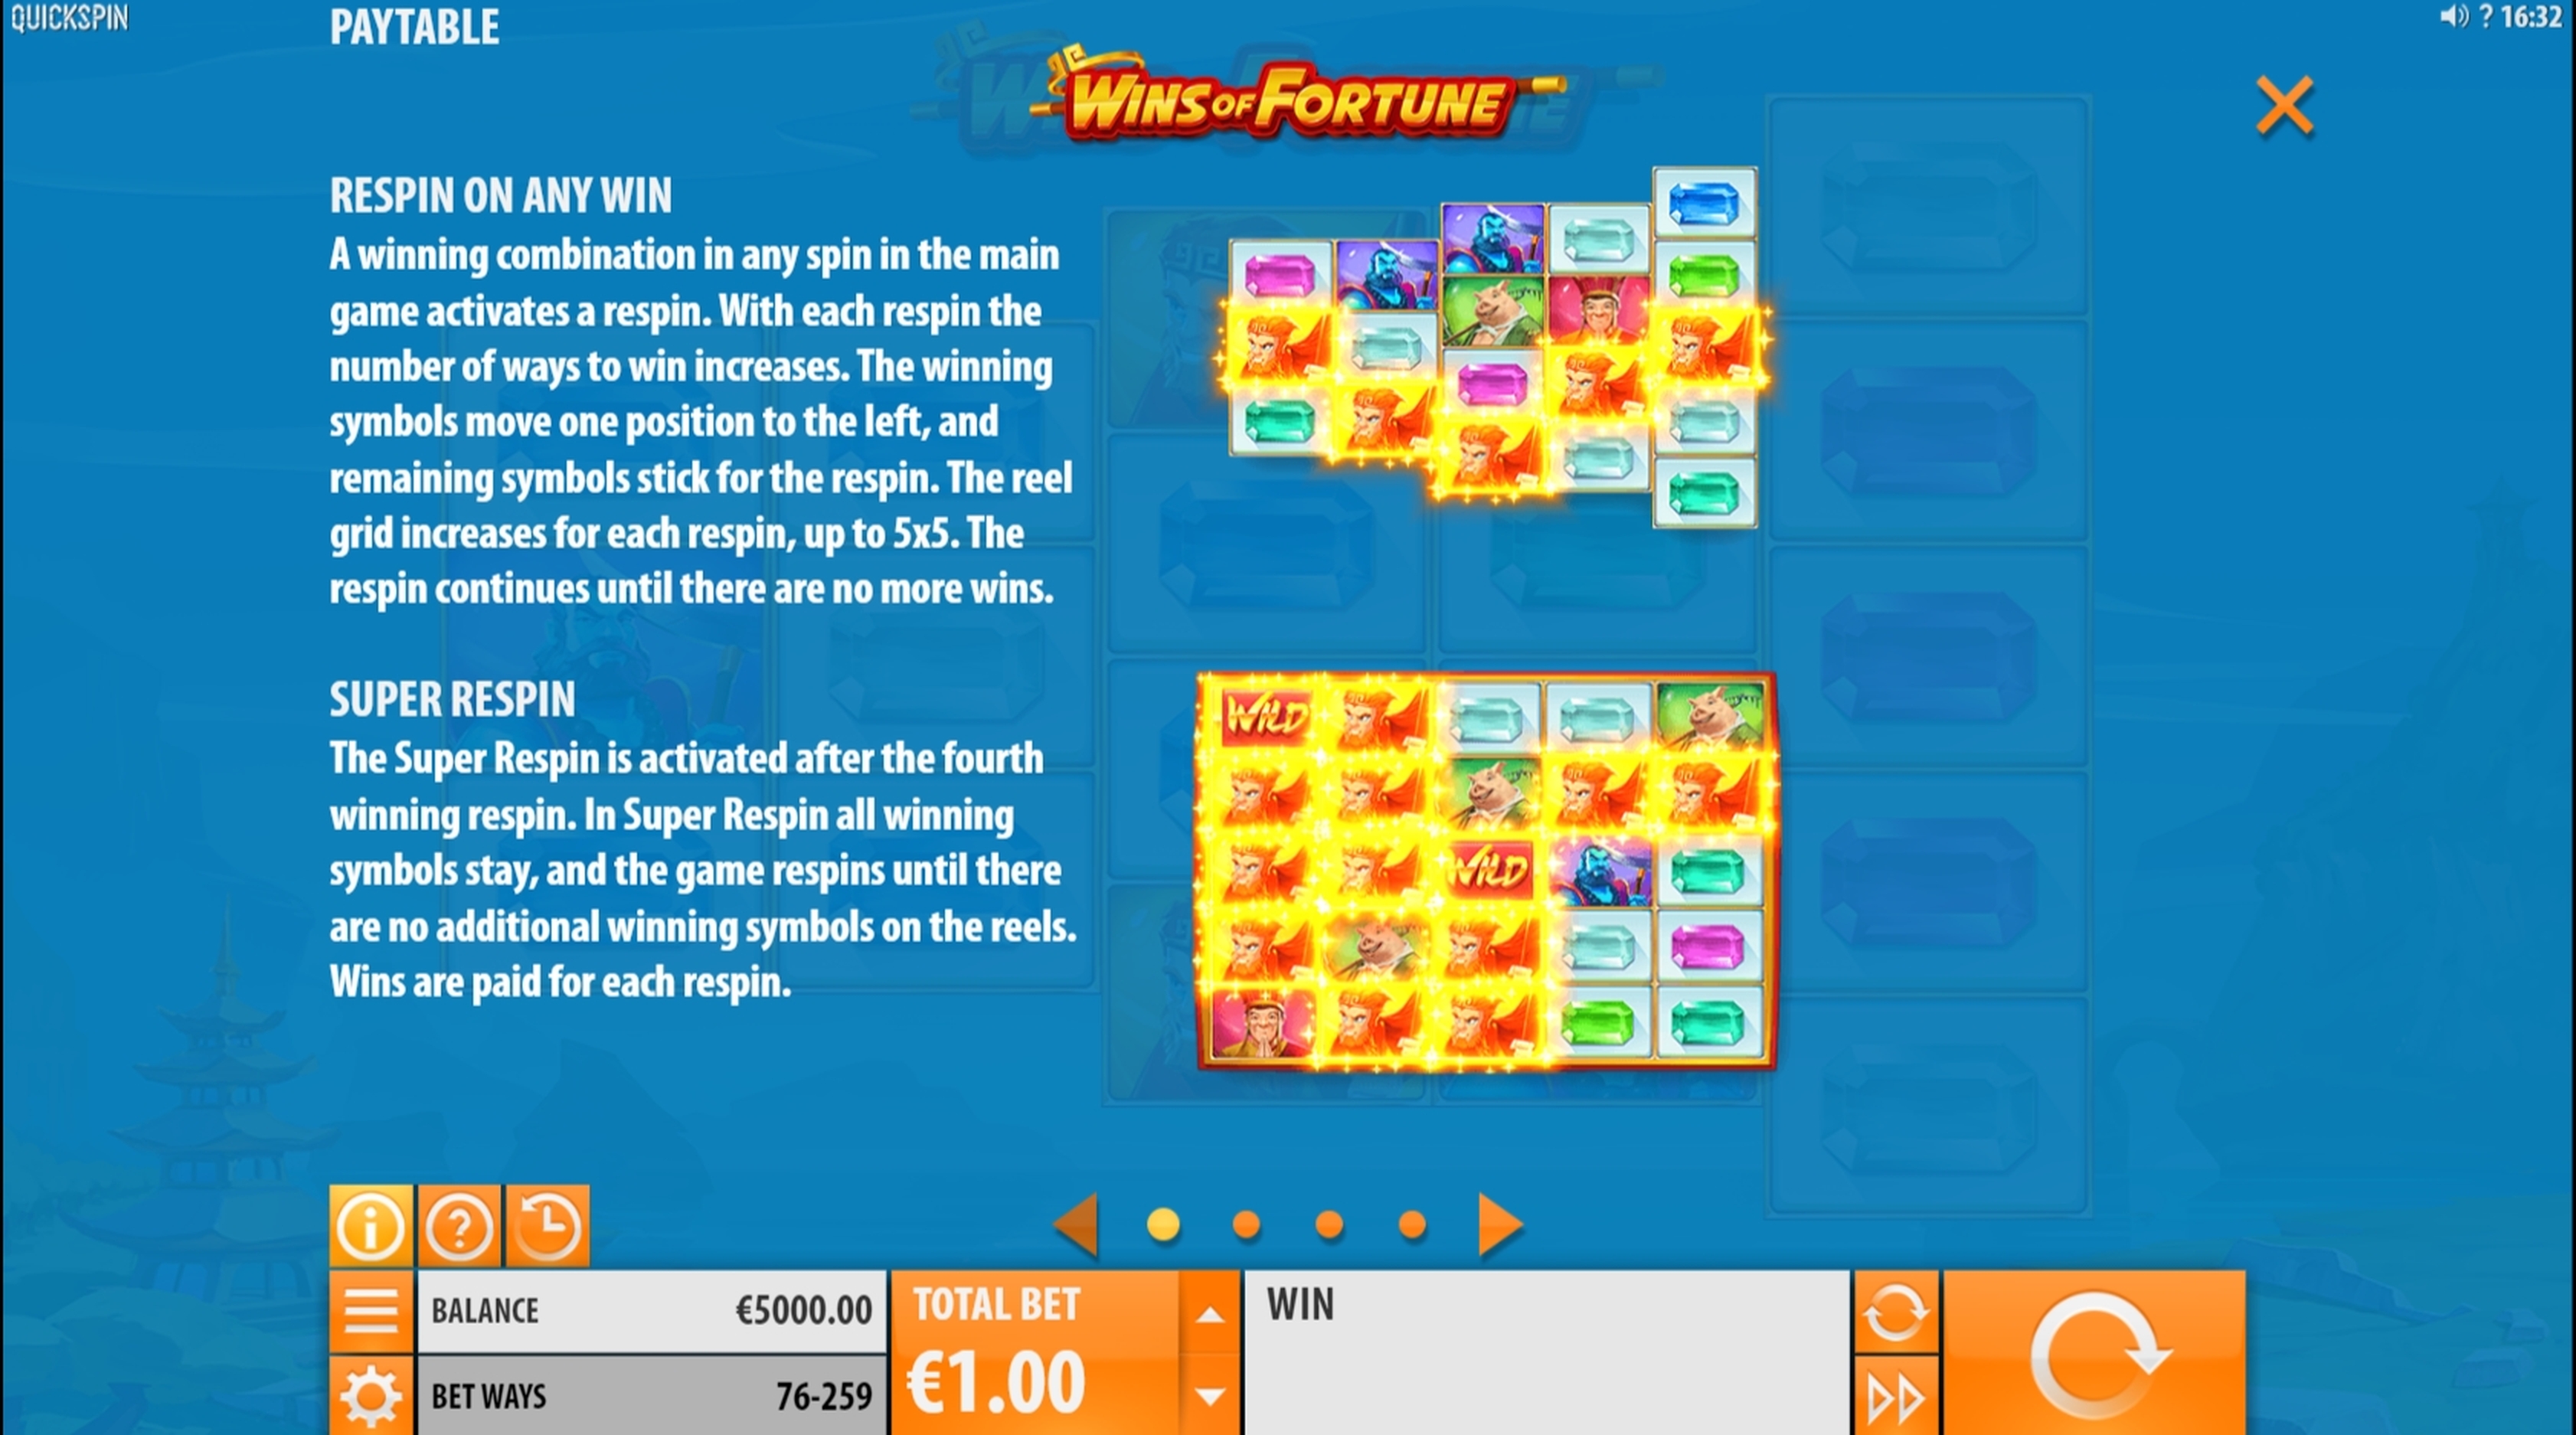 Info of Wins of Fortune Slot Game by Quickspin